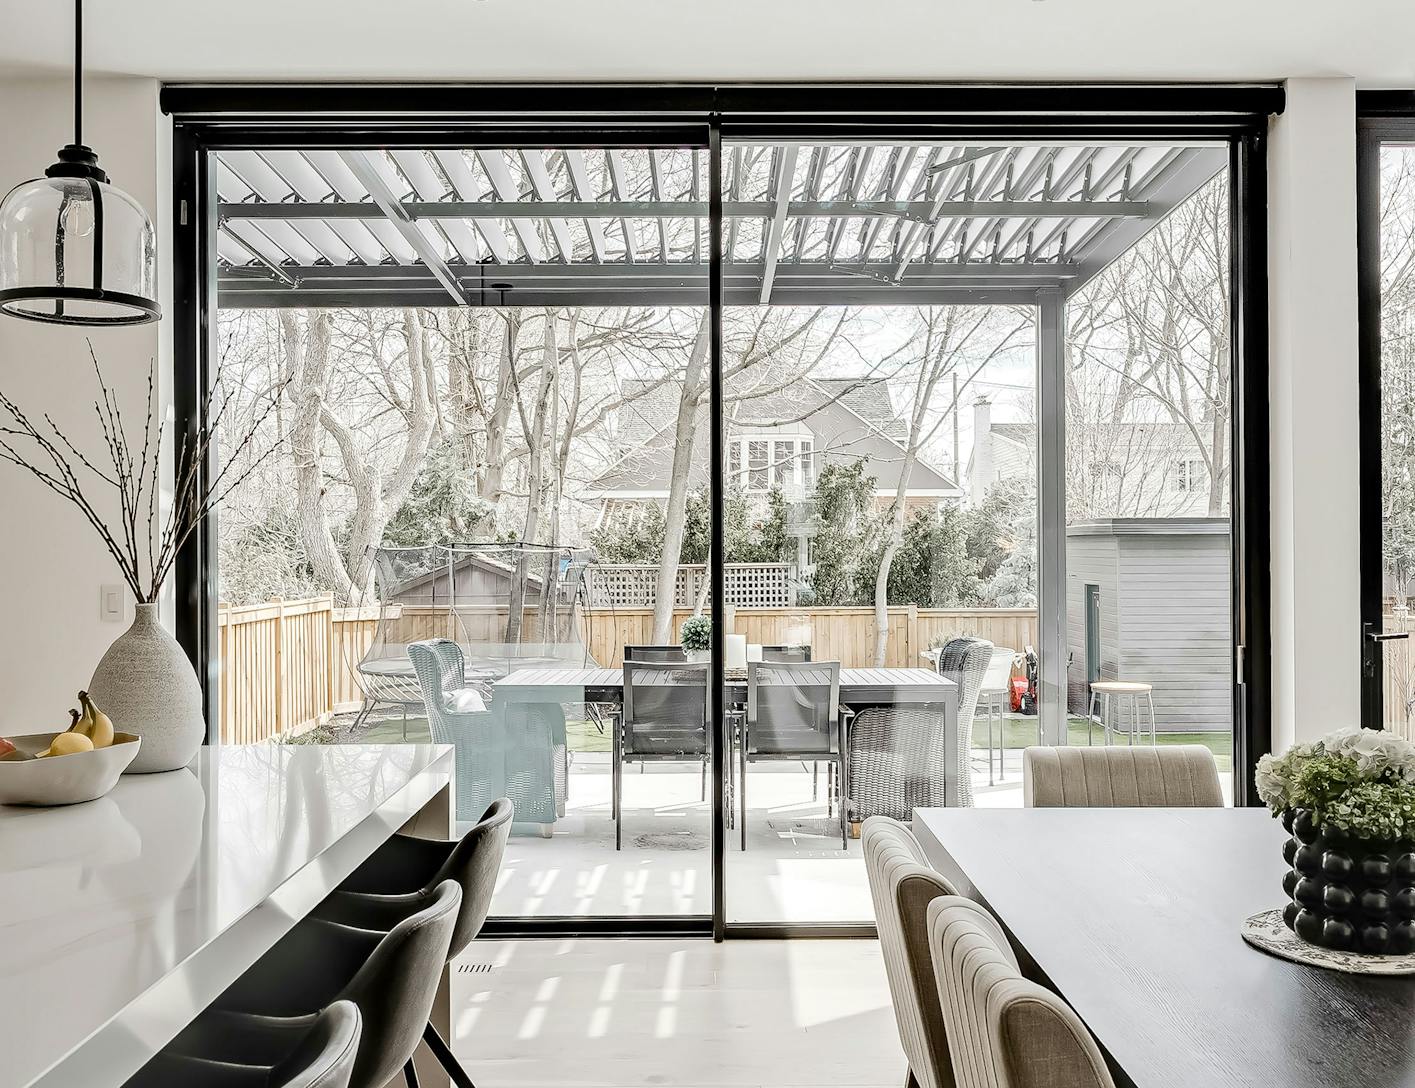 A modern kitchen with large glass doors and a dining table